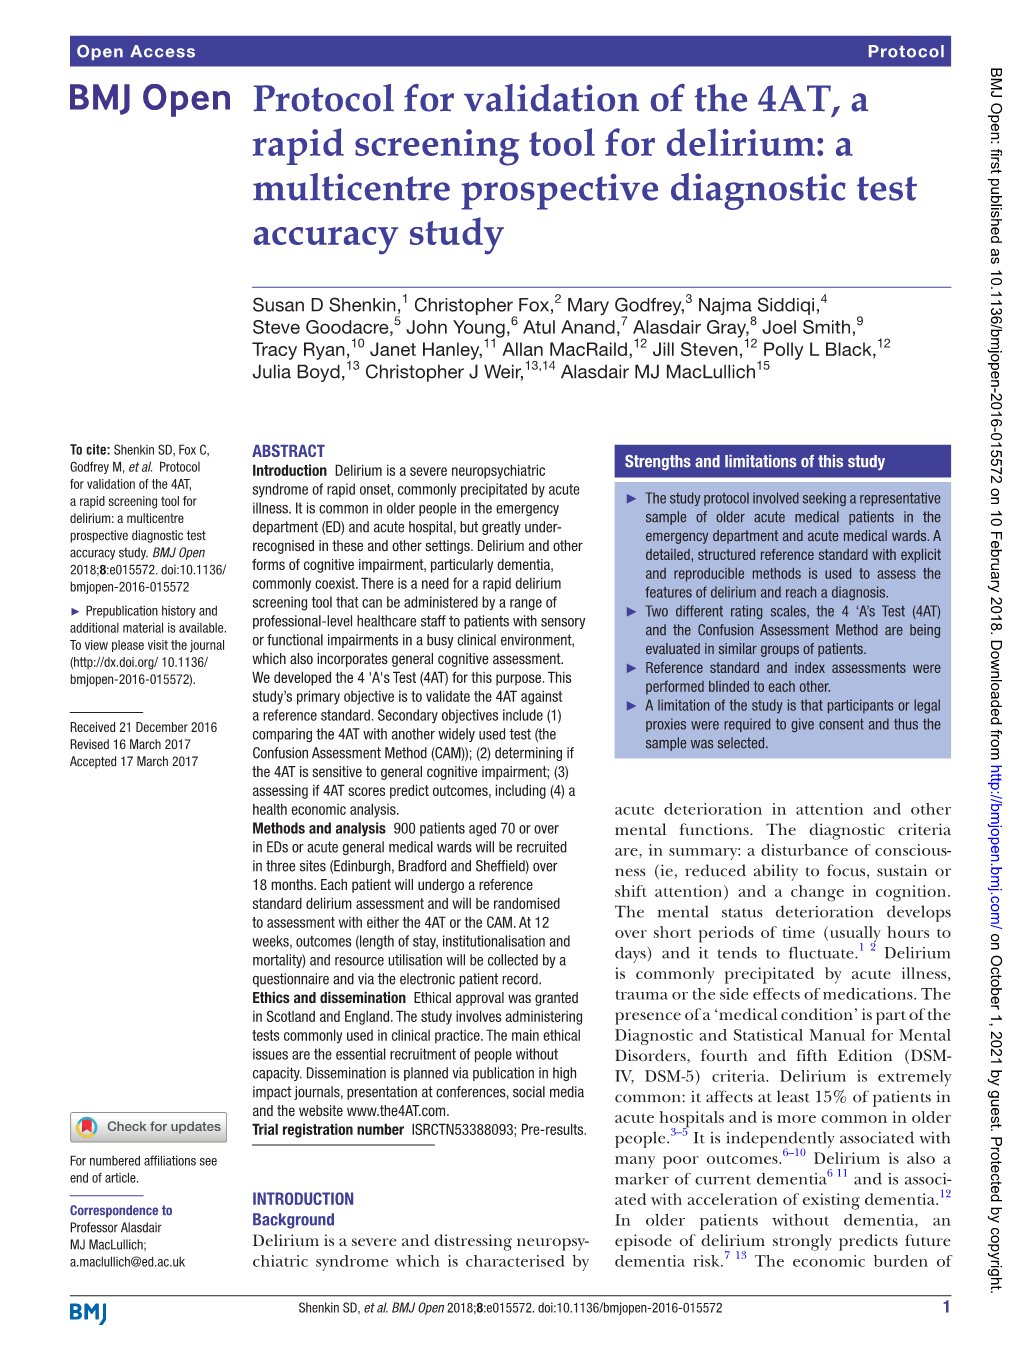 Protocol for Validation of the 4AT, a Rapid Screening Tool for Delirium: a Multicentre Prospective Diagnostic Test Accuracy Study